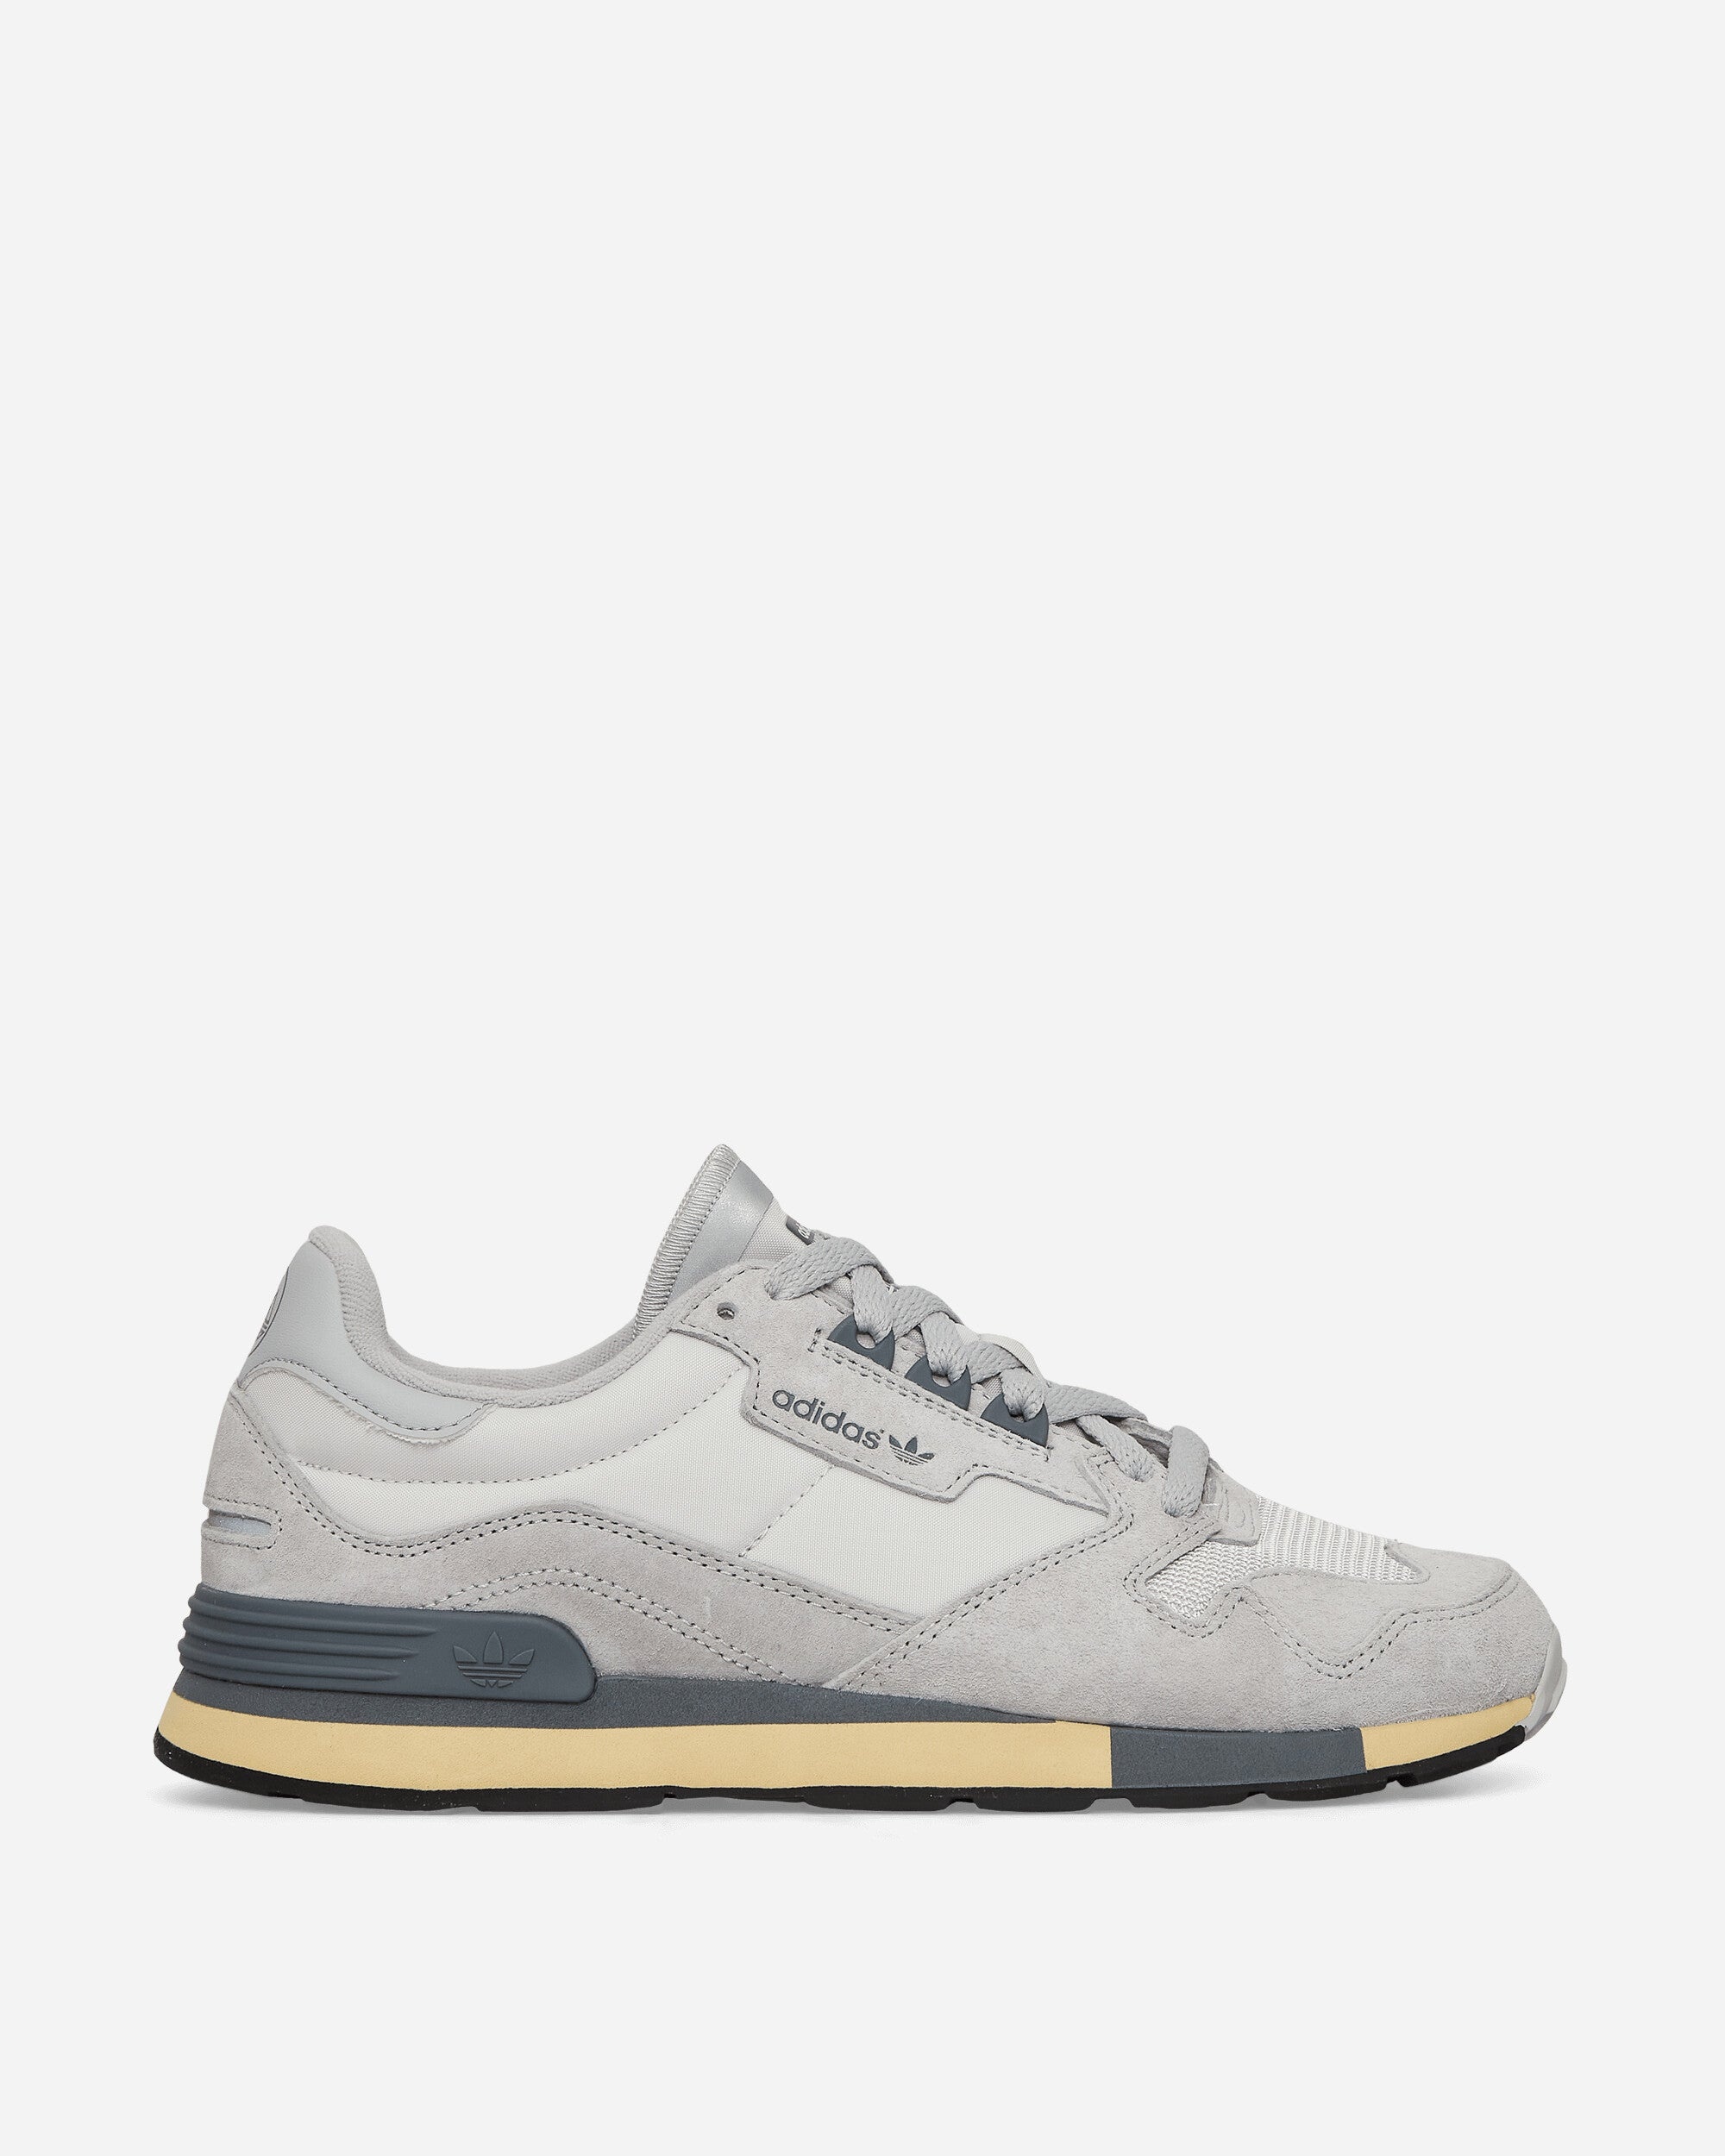 Whitworth SPZL Sneakers Grey One / Grey Two / Clear Onix - 1